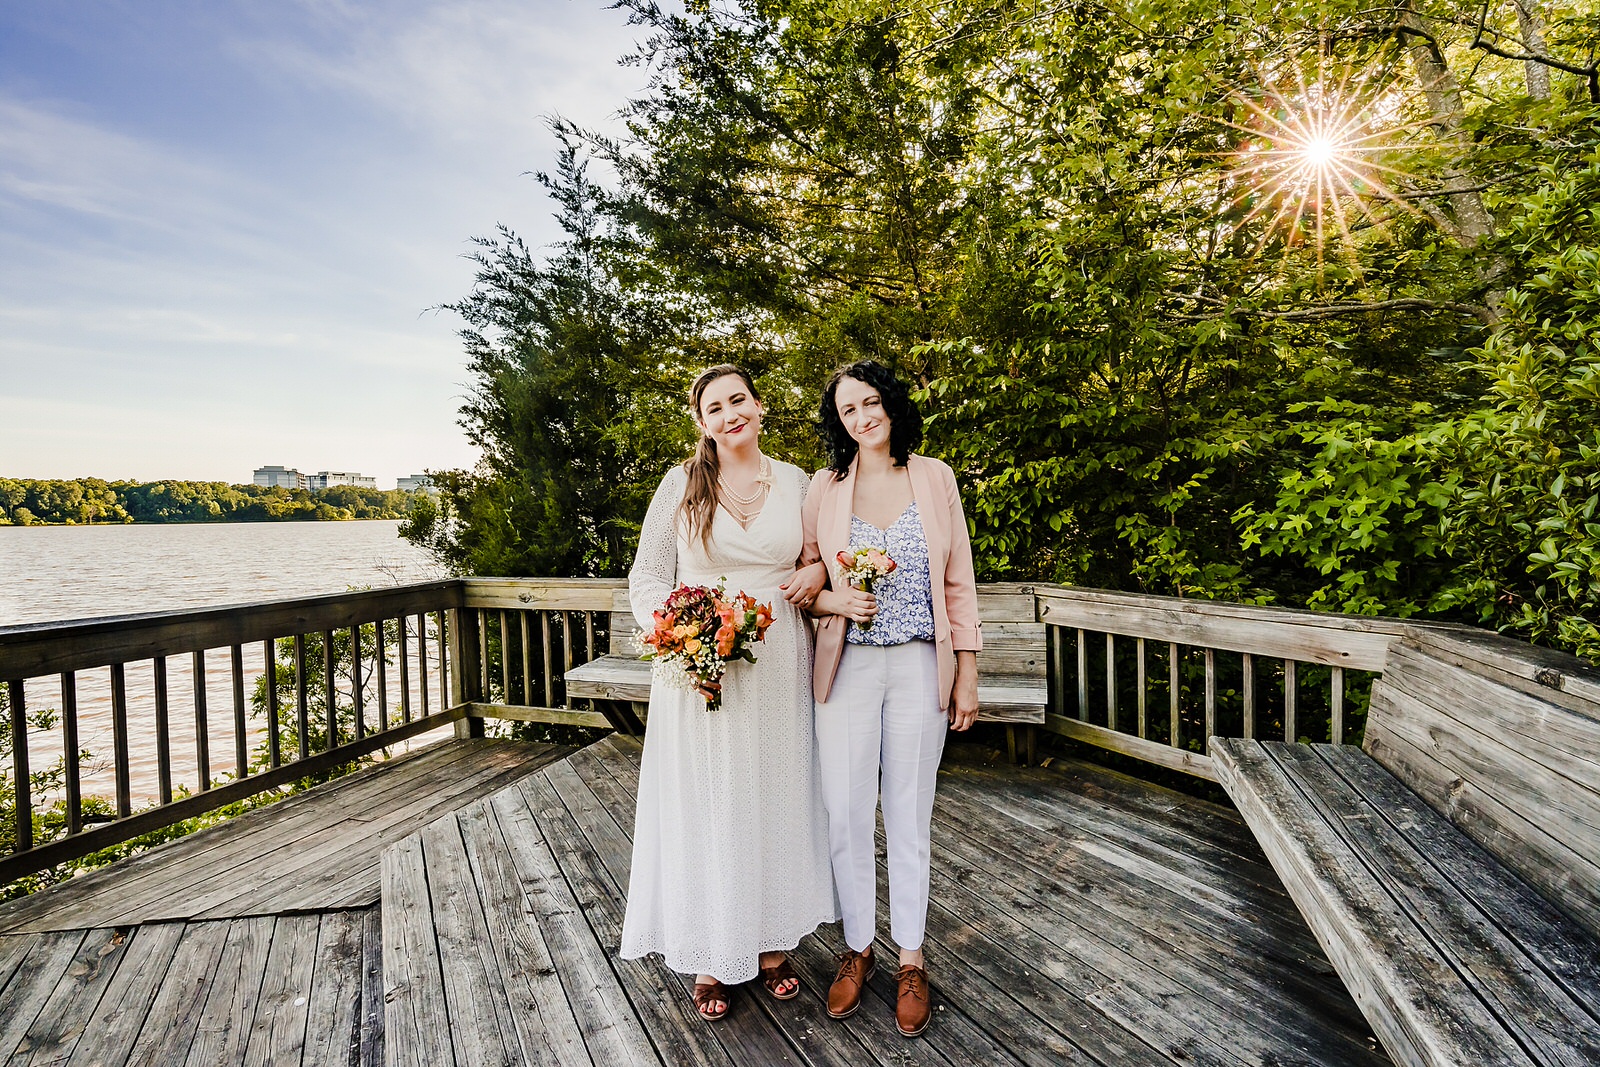 Portrait of two brides at their wedding ceremony location